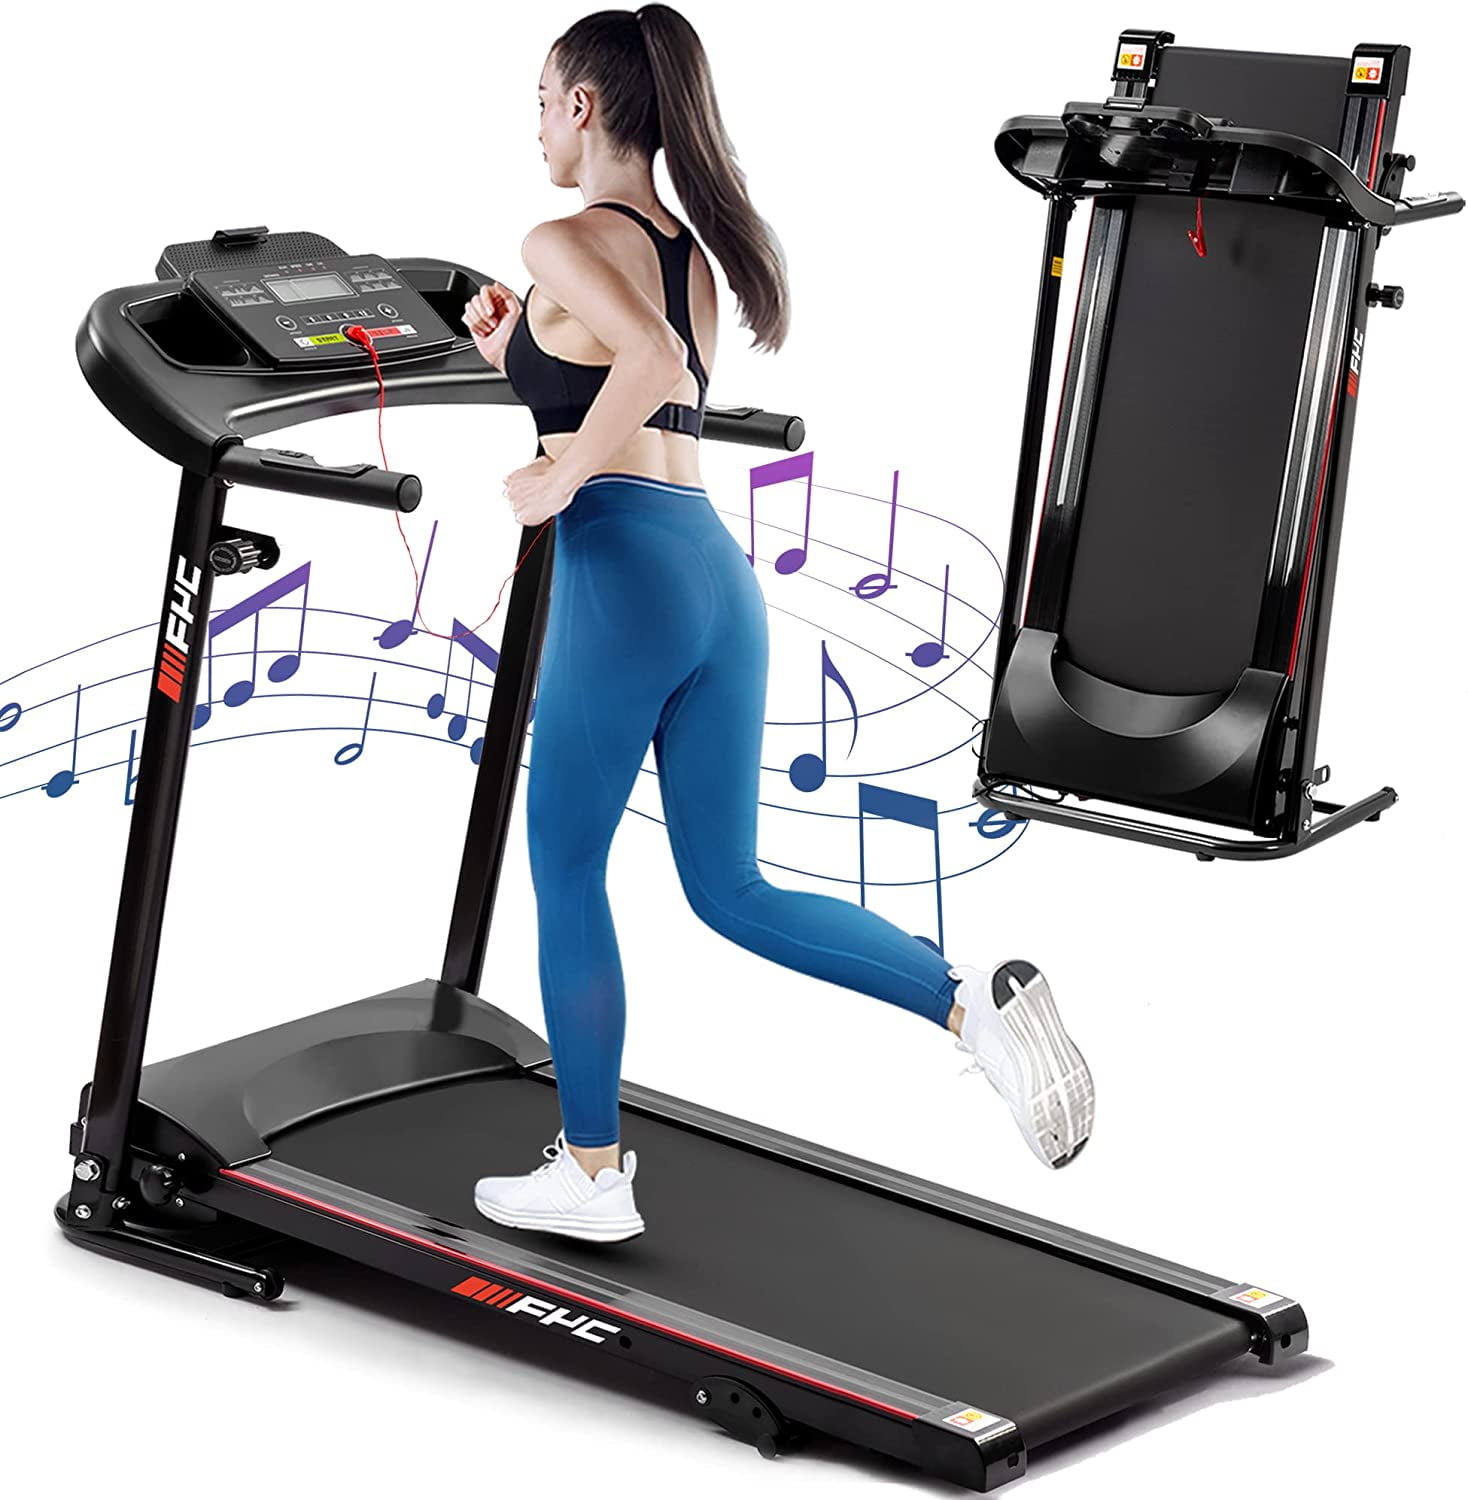 Folding Treadmill Portable Gym Equipment Home Intelligent Electric Fitness Workout Multifunction Household Walking Machine 